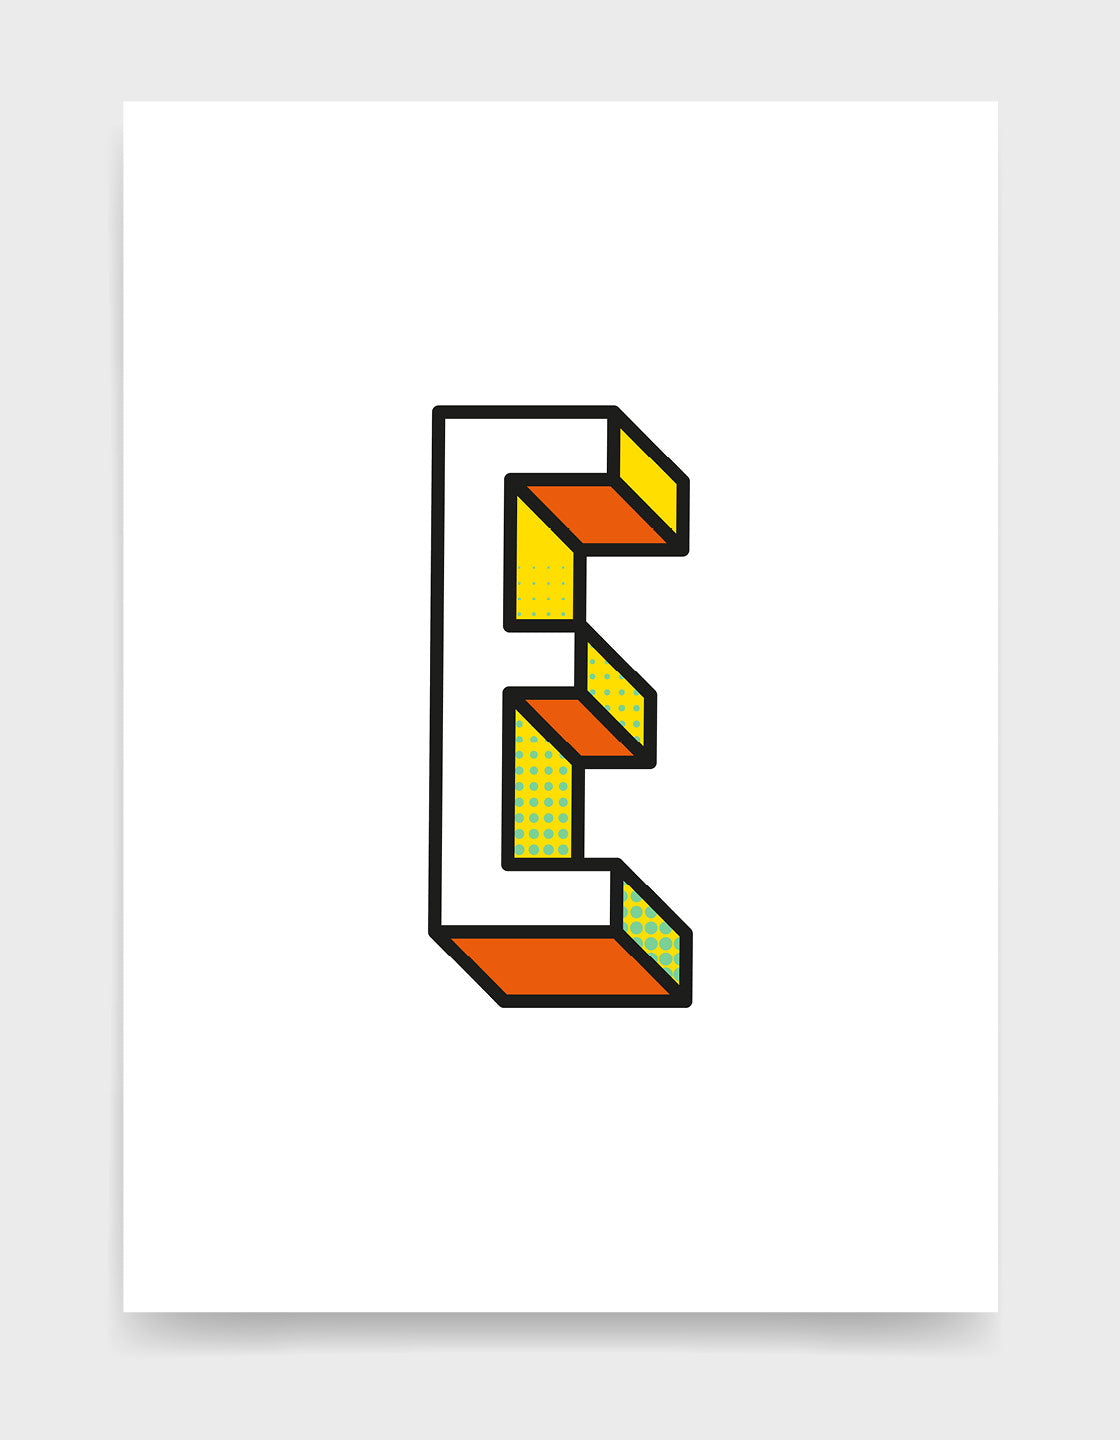 Letter E 3D style initial print with black outline and yellow and orange detail against a white background